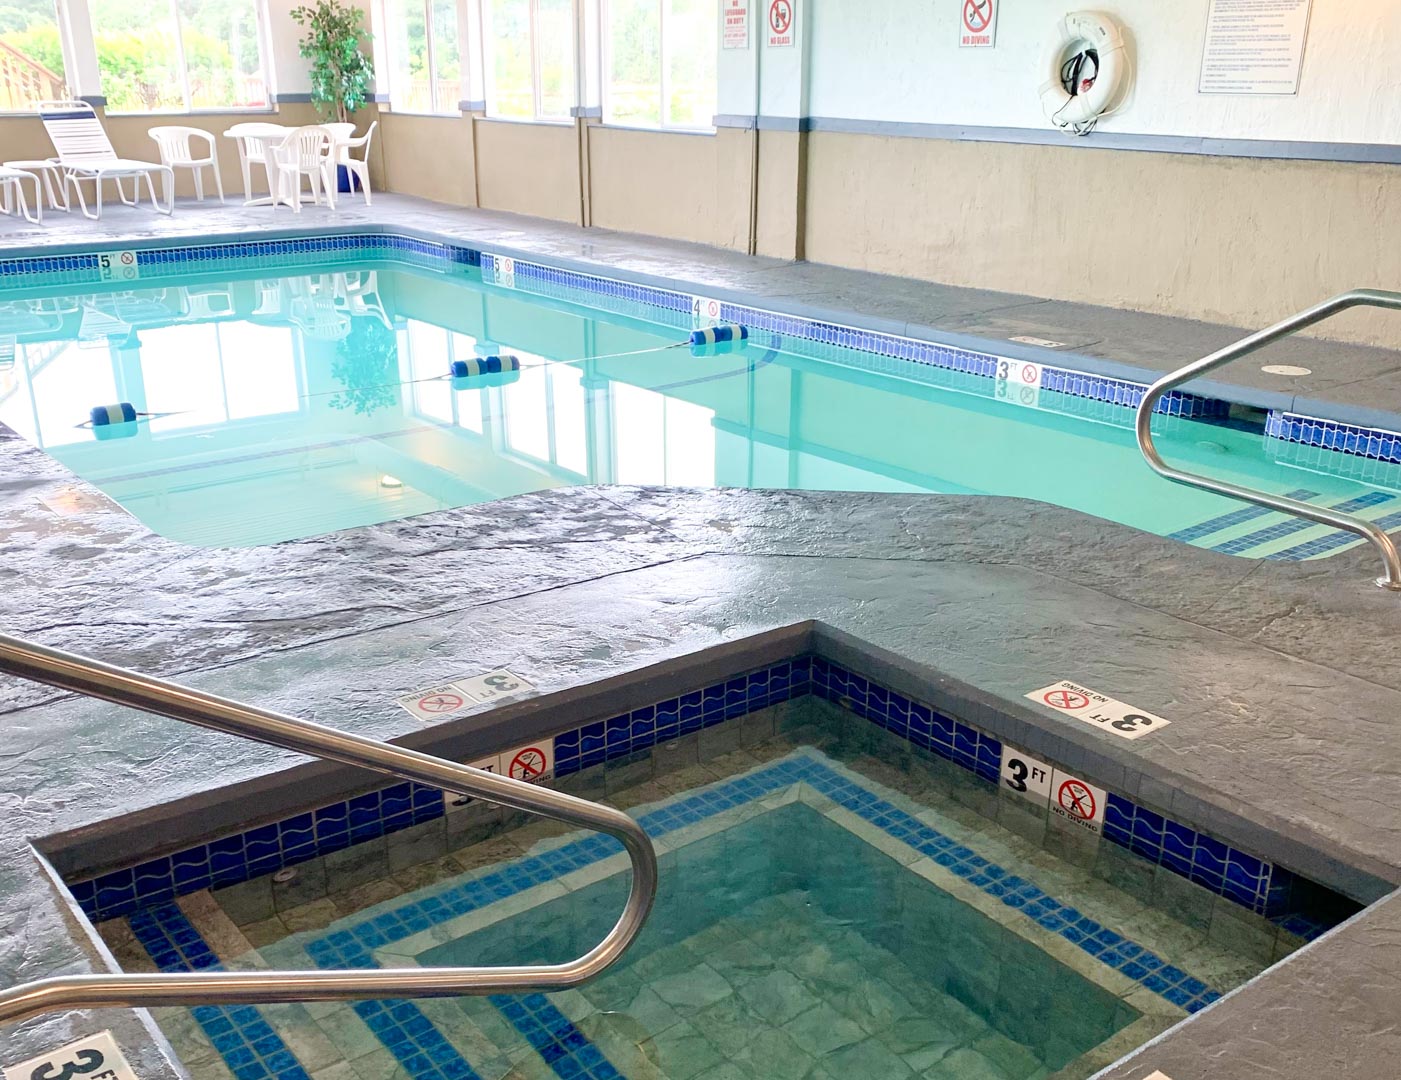 A peaceful indoor swimming pool at VRI's Riverview Resort in Massachusetts.